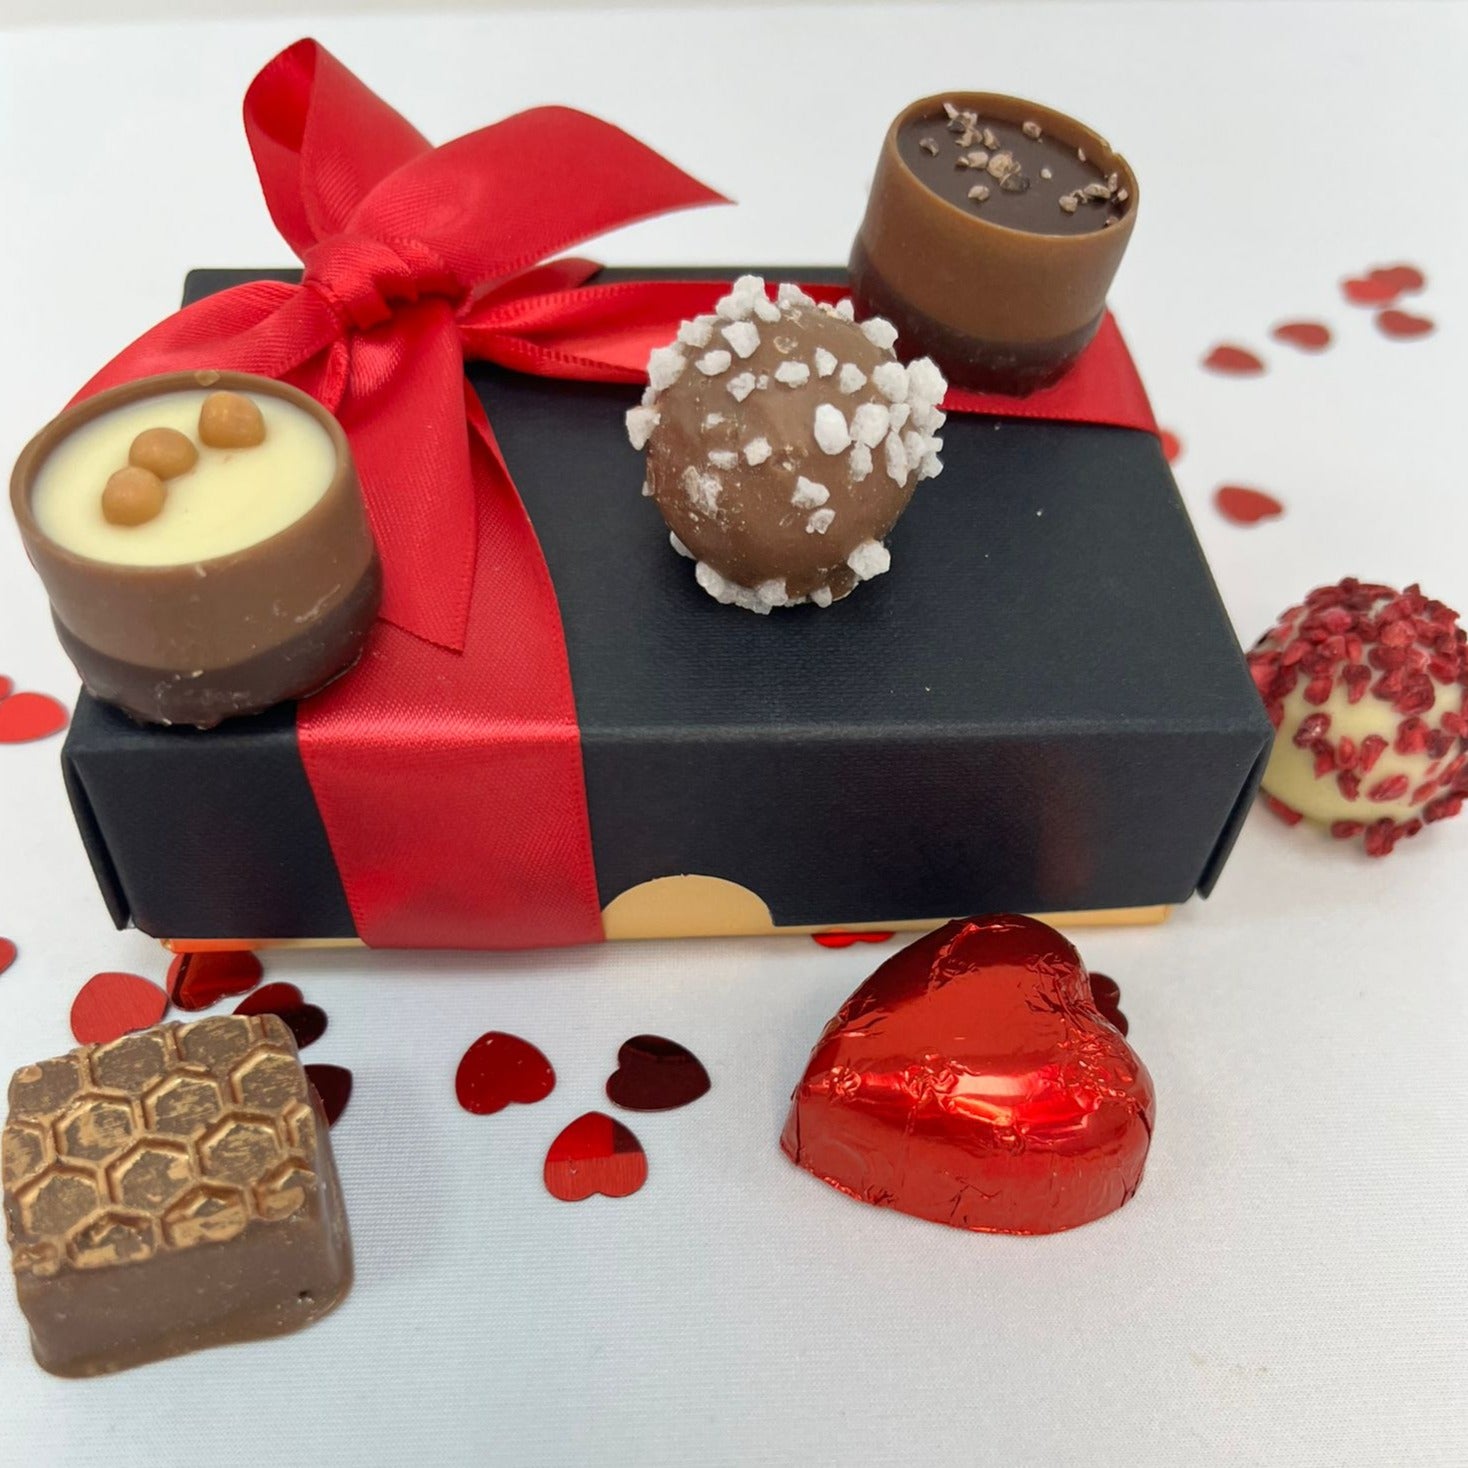 Your Employer Loves You! - With Personalised Valentines Box